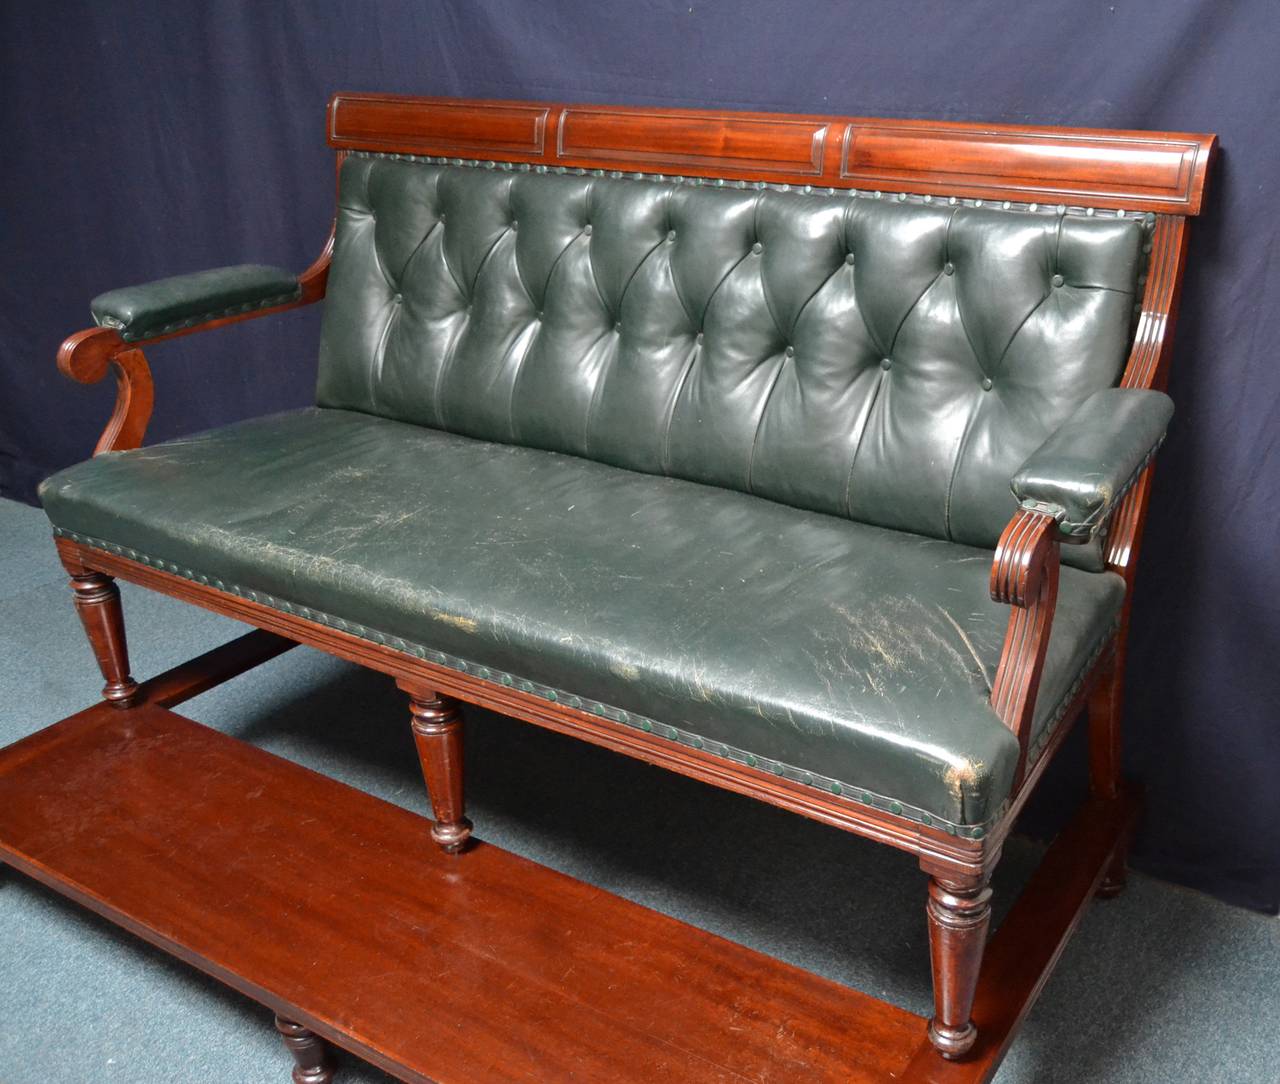 A Mahogany framed Billiard - Snooker viewing bench circa 1900, nicely aged green leather, standing on a raised platform with turned feet, which enables seated spectators an excellent view of the table.

The viewing platform has undergone